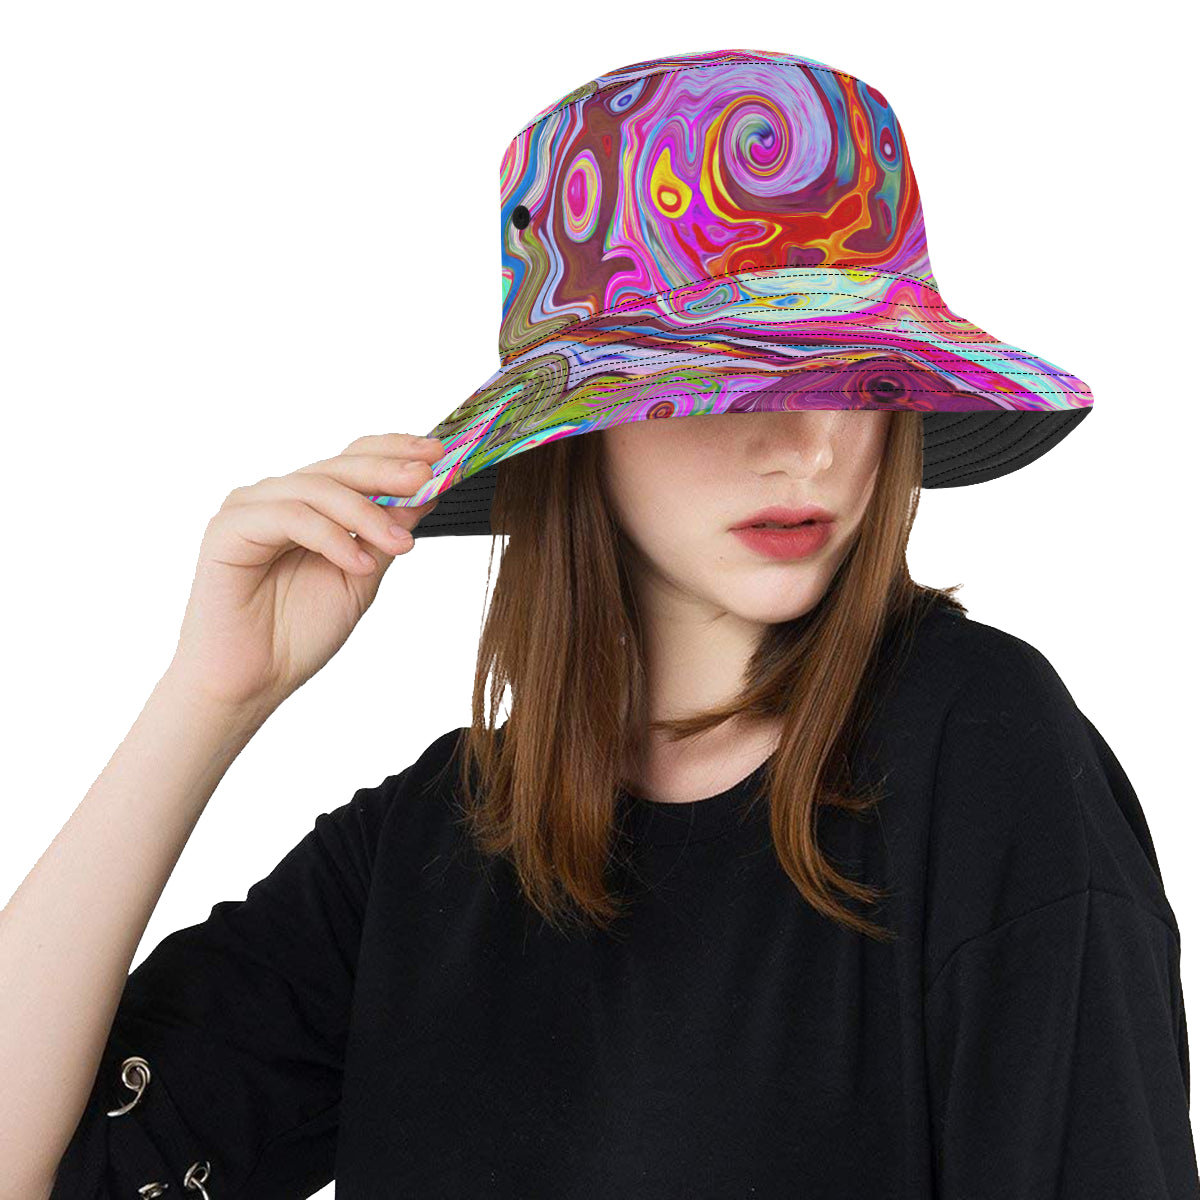 Bucket Hats, Groovy Abstract Retro Hot Pink and Blue Swirl